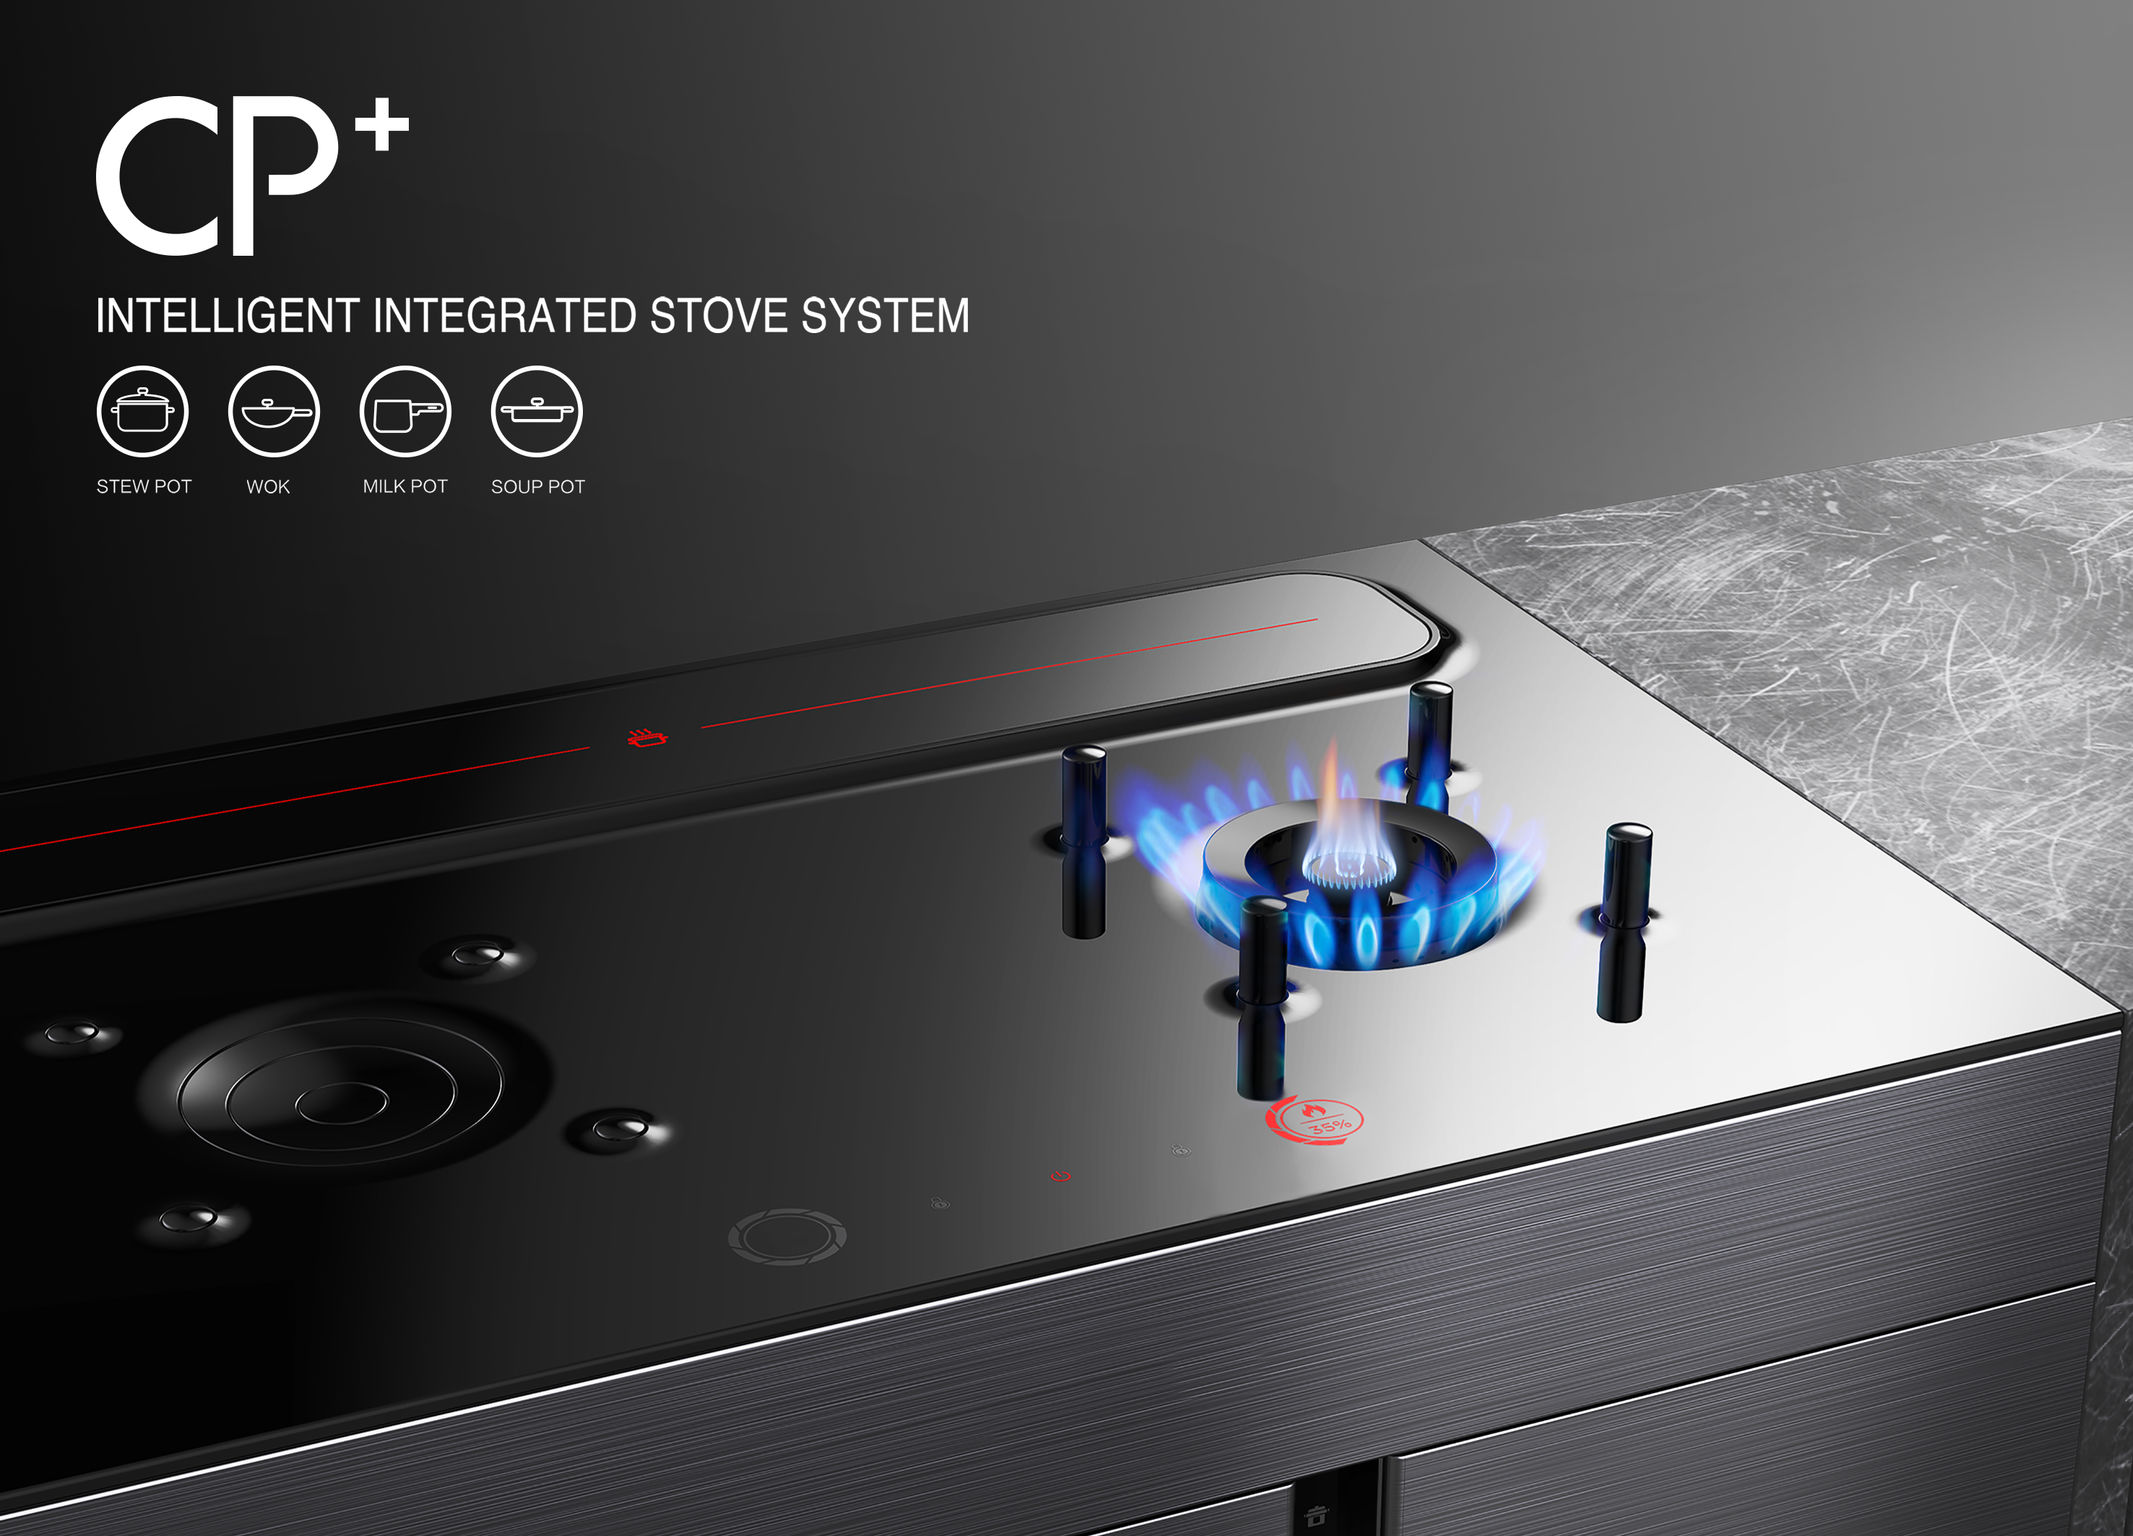 CP + intelligent integrated stove system